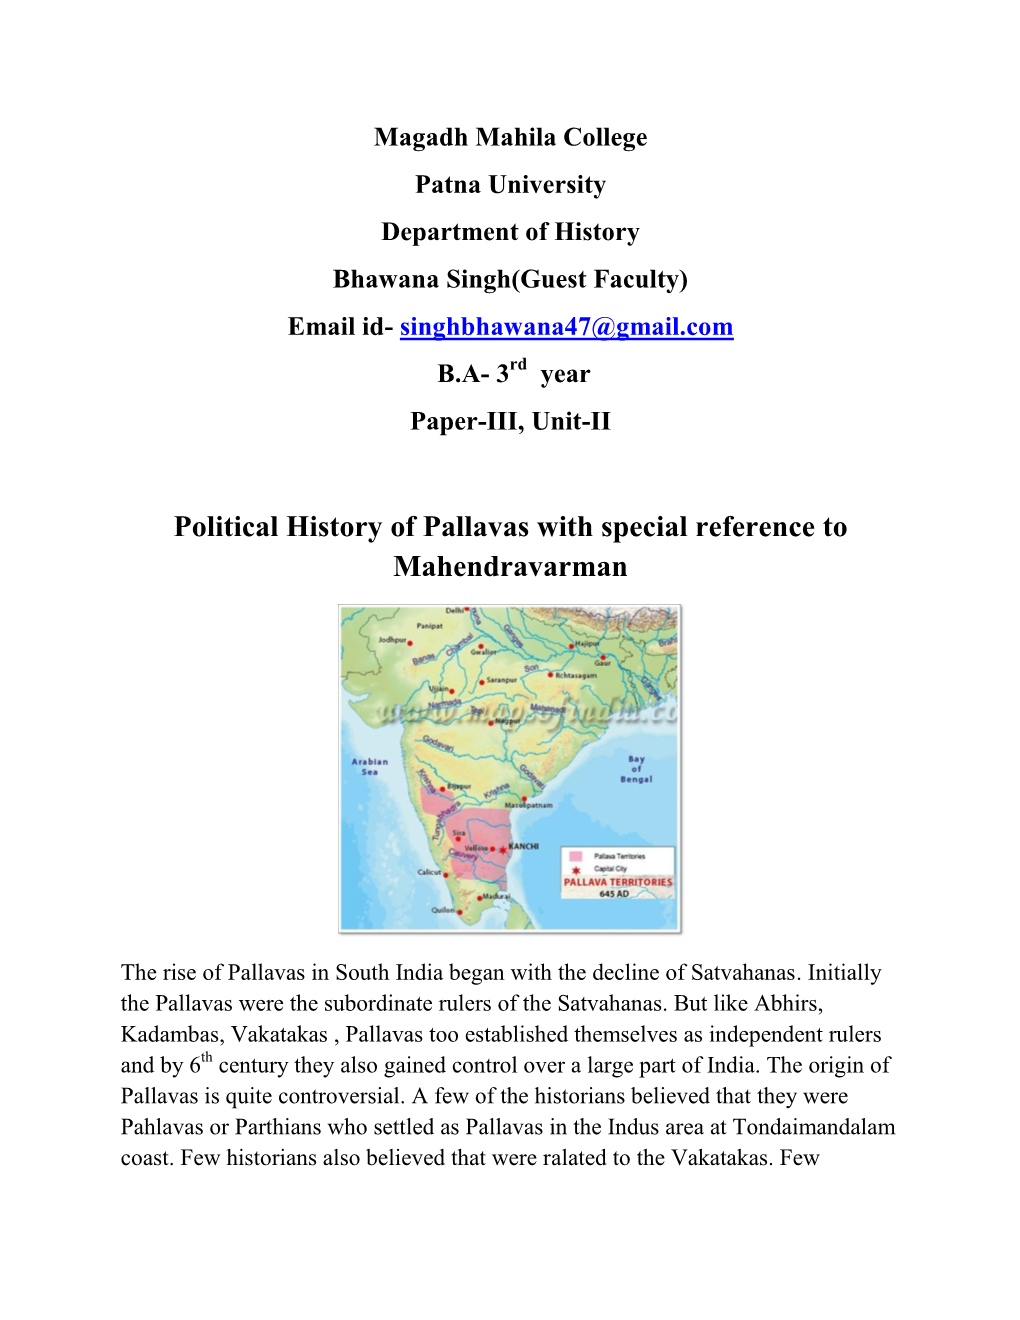 Political History of Pallavas with Special Reference to Mahendravarman